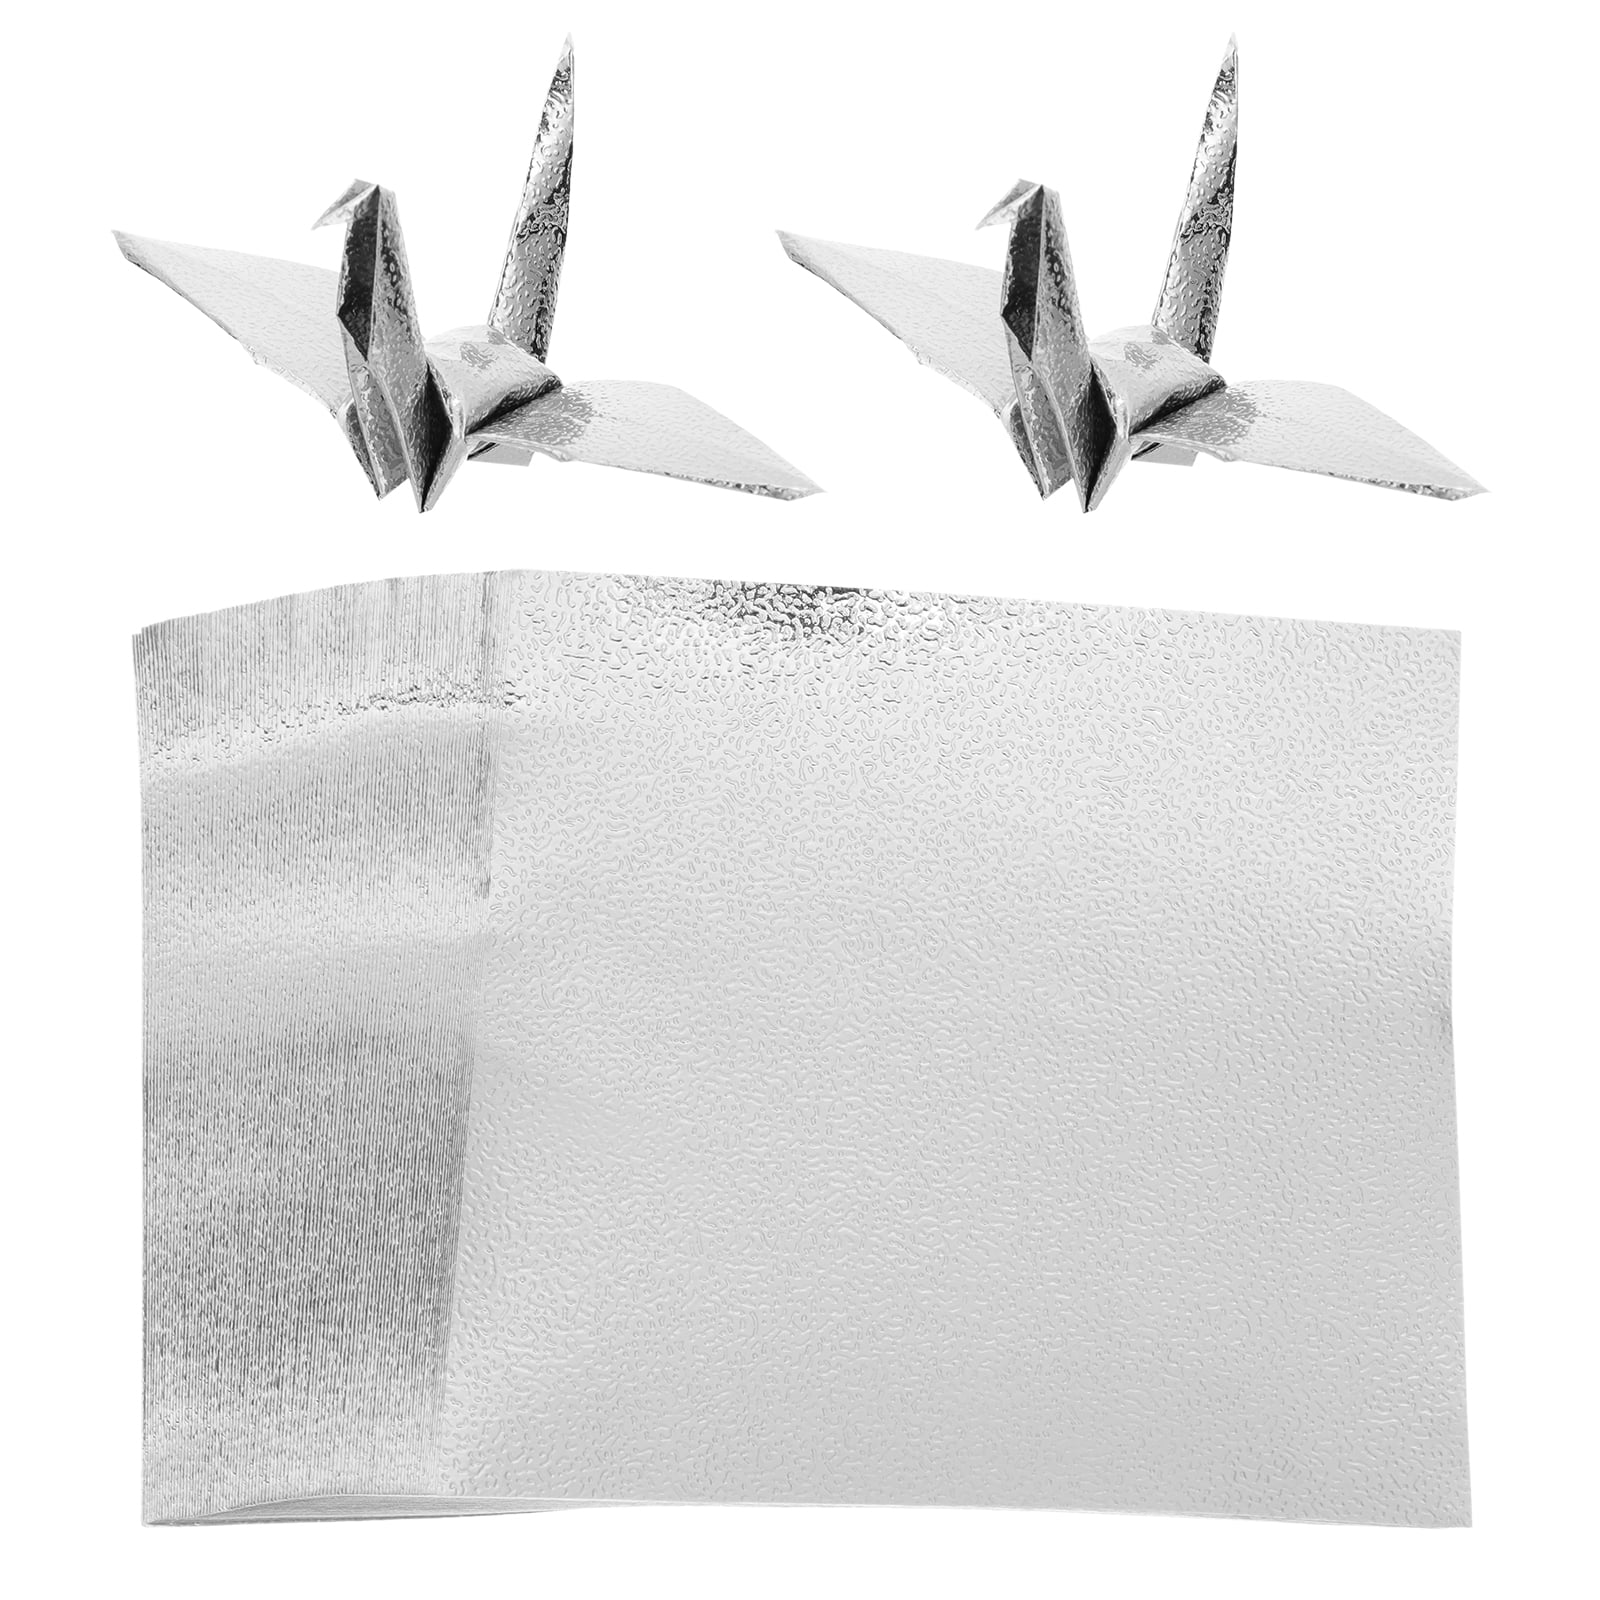 EXCEART 200pcs Washi Origami Paper Square Origami Paper Origami Papers  Double Sided Paper Folding Art Origami Paper Crafts Diy Origami Paper Crane